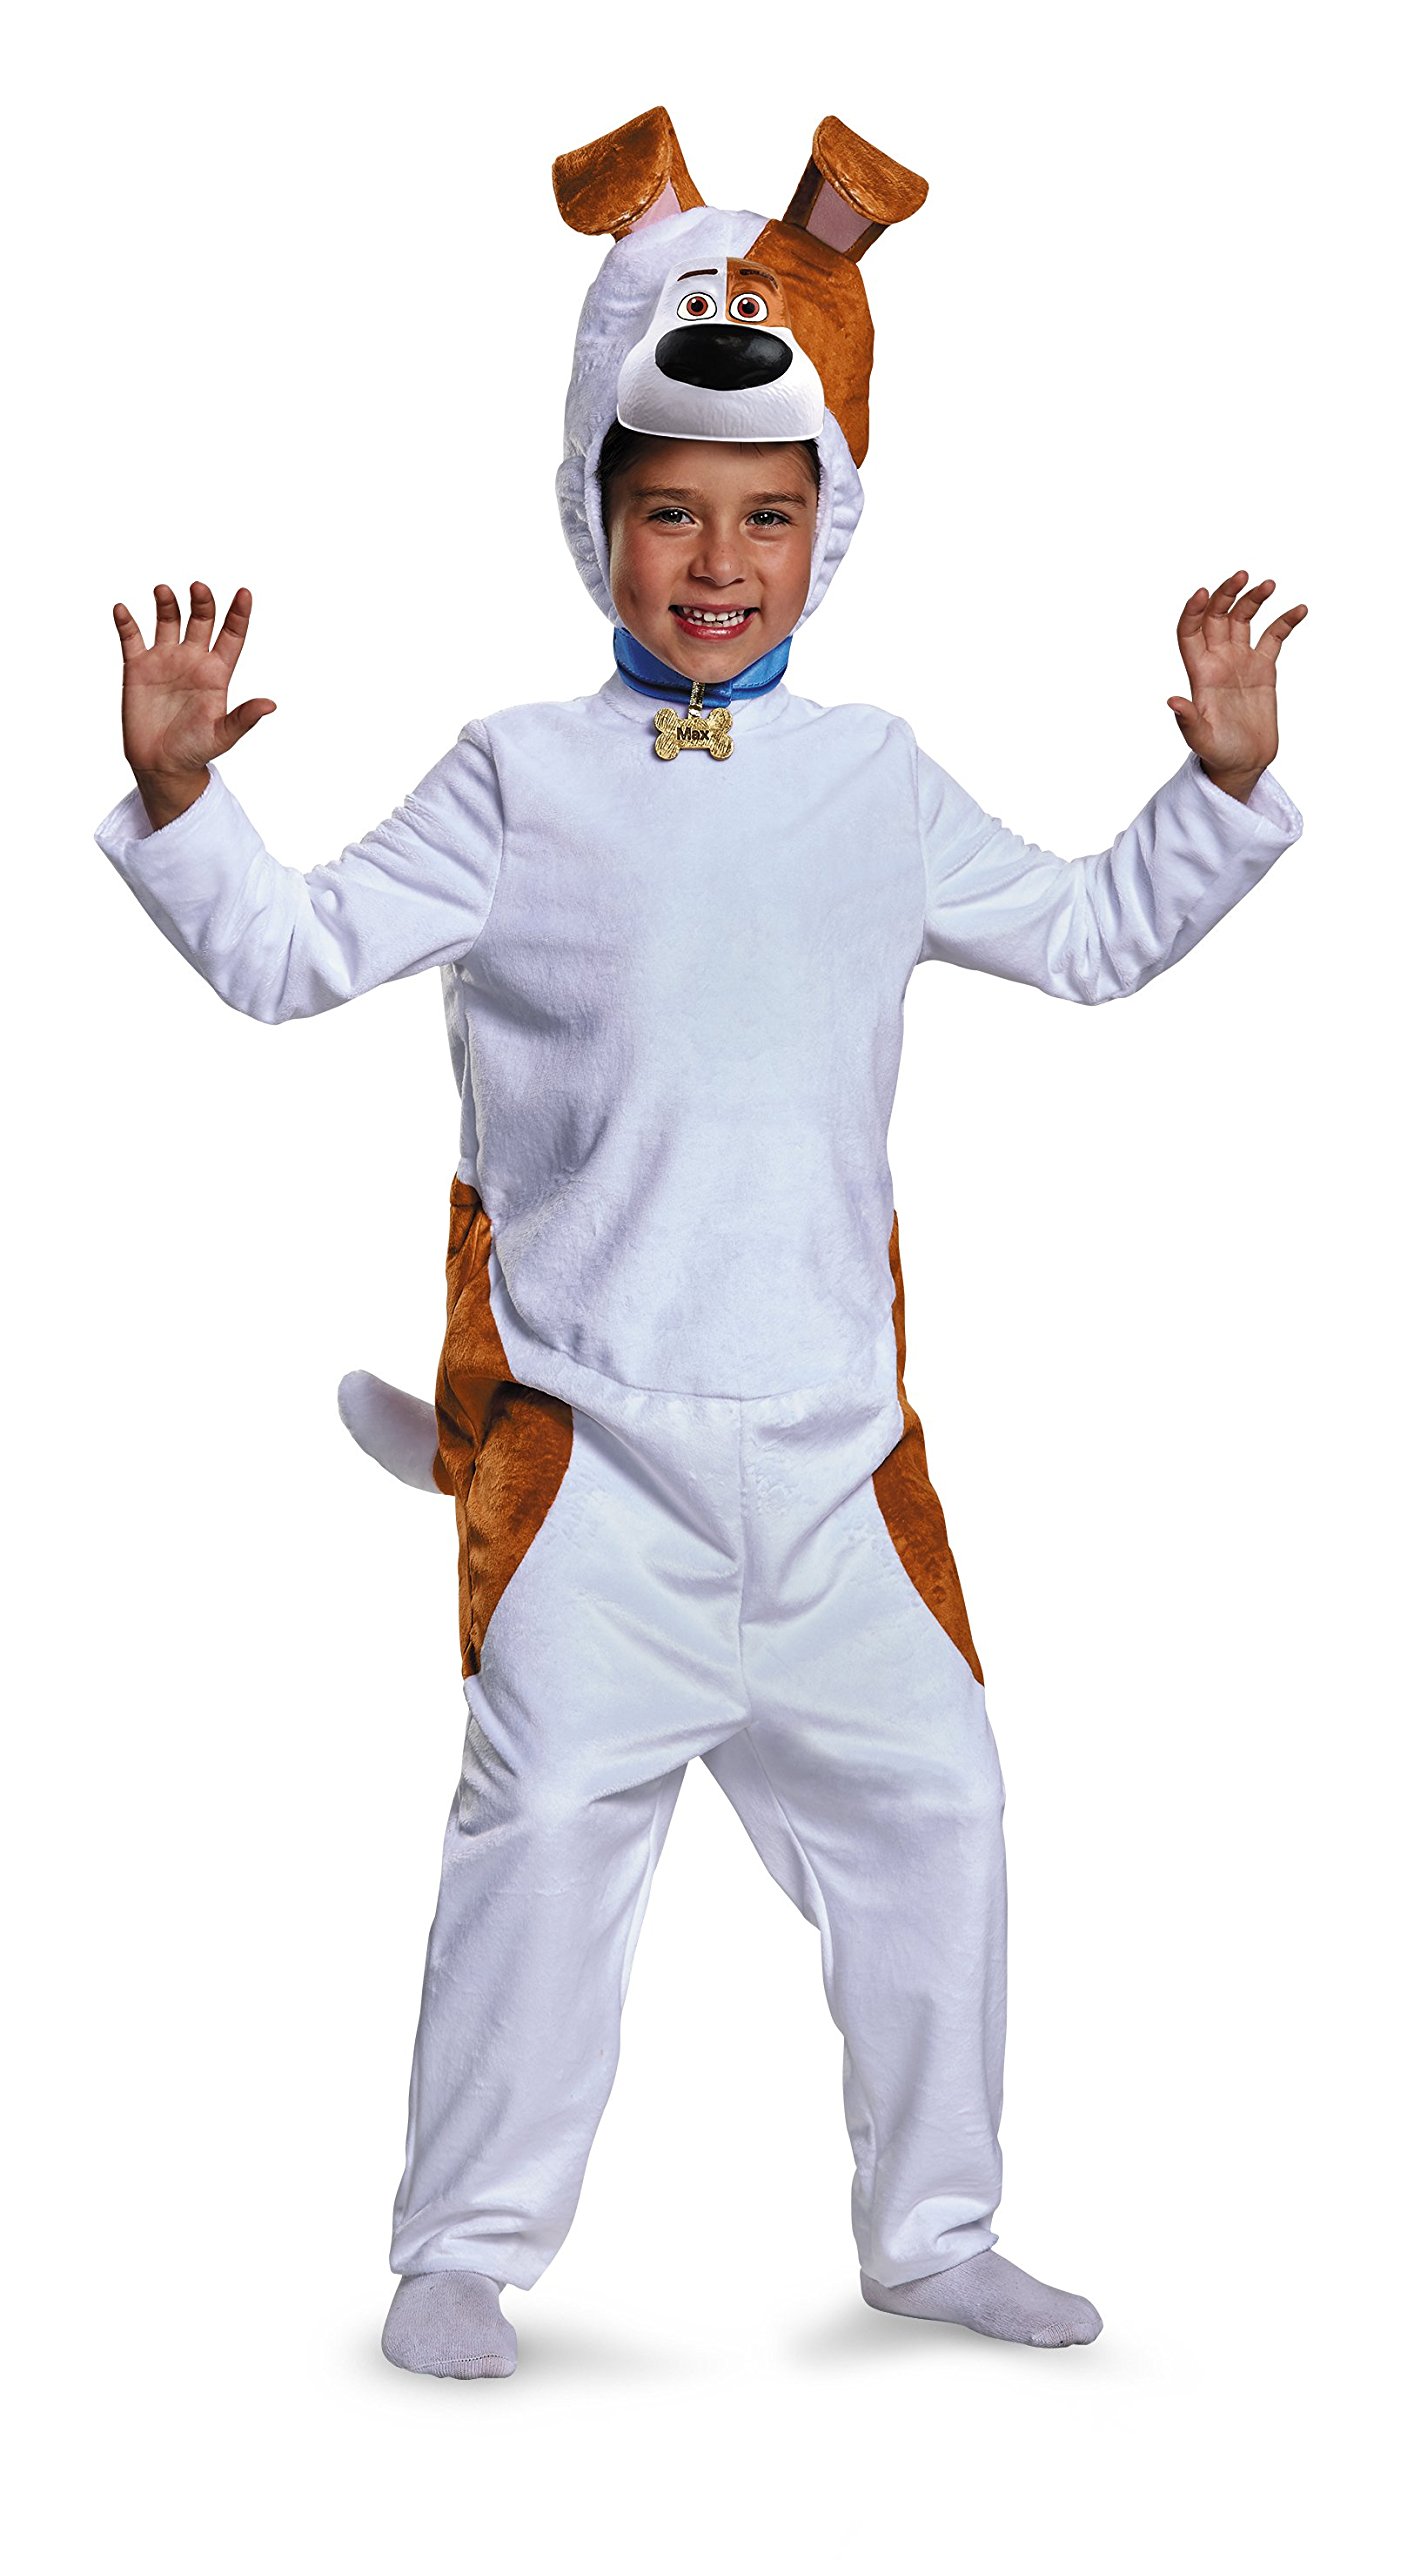 Disguise Secret Life of Pets Max Boy's Halloween Fancy-Dress Costume for Child, Toddler 3T-4T - image 1 of 3